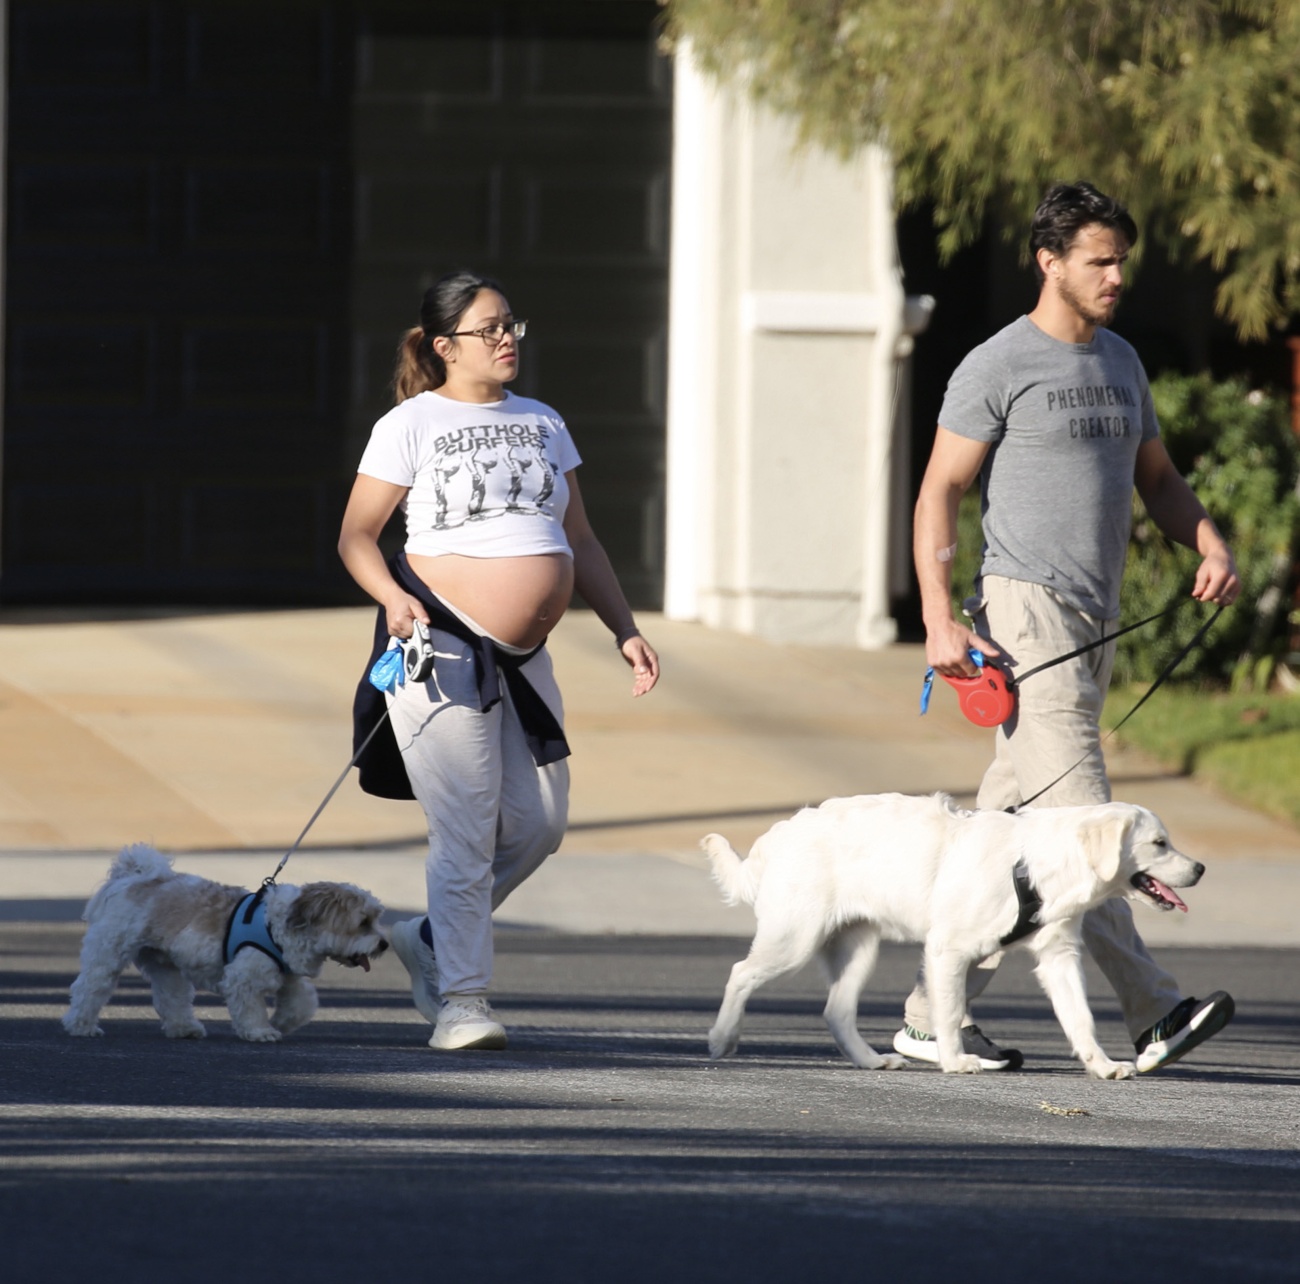 A very pregnant Gina Rodriguez walks with her husband, Joe Locicero, through the streets of Los Angeles